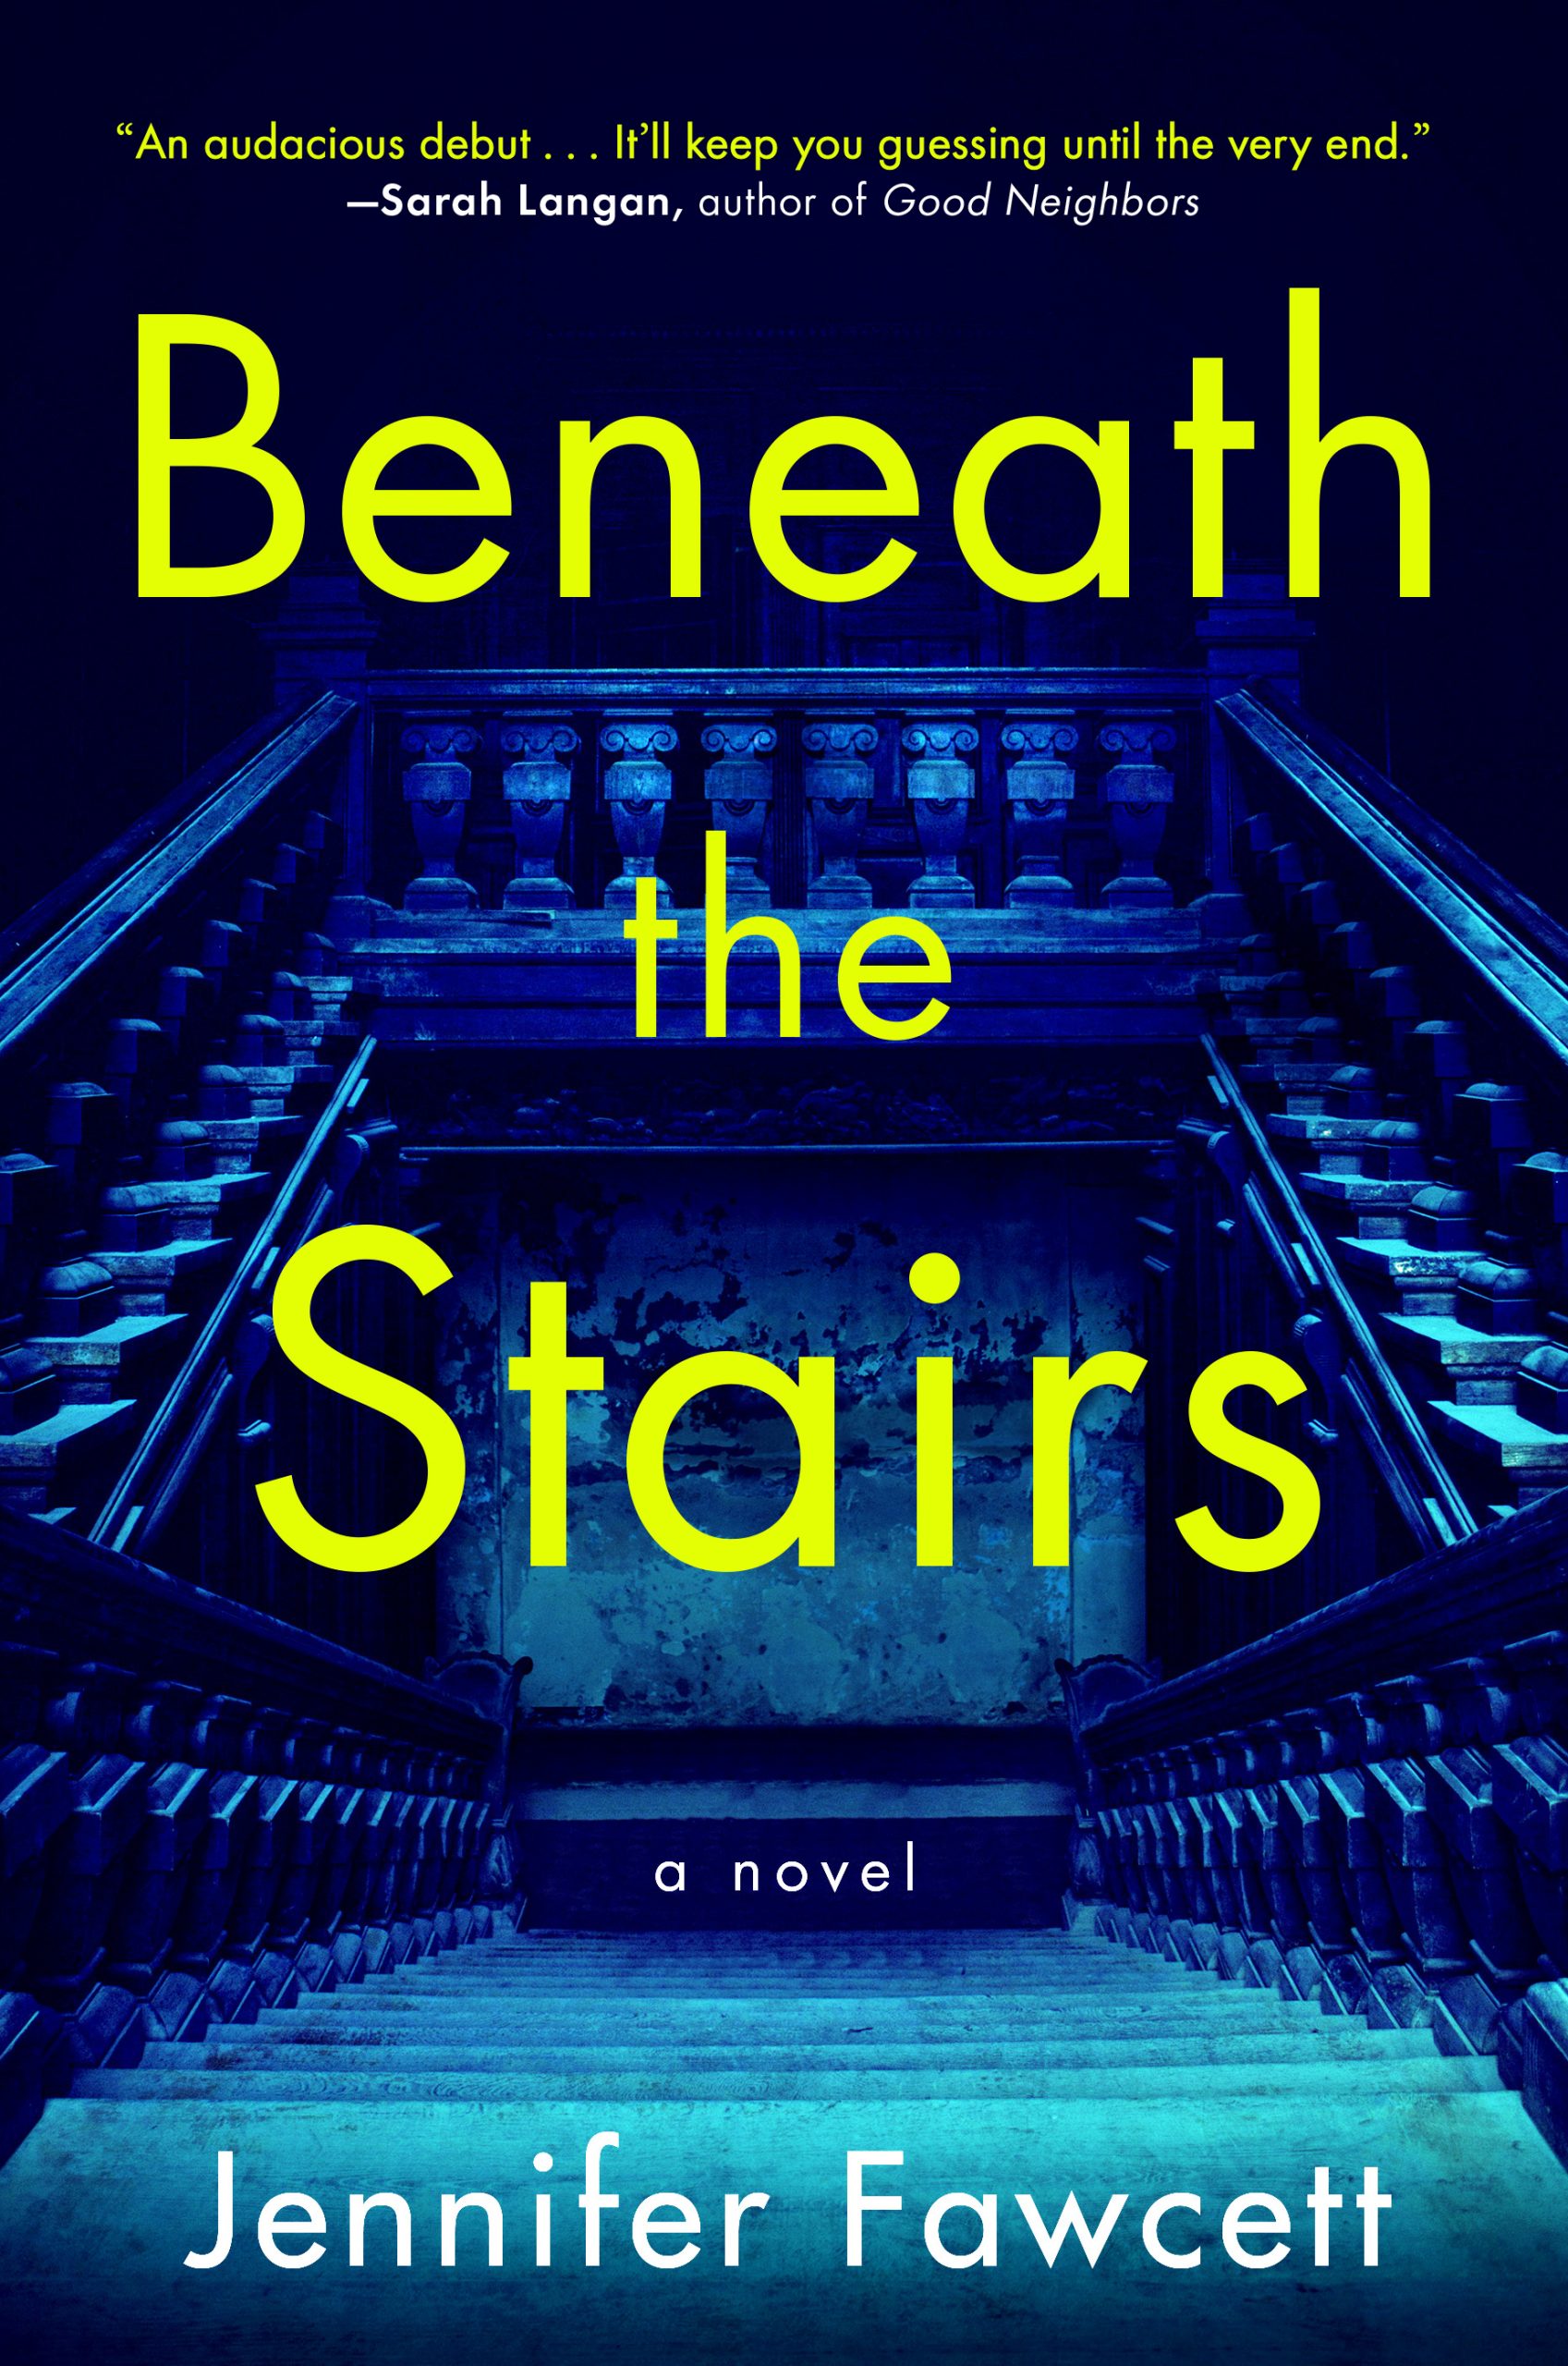 Beneath the Stairs final cover